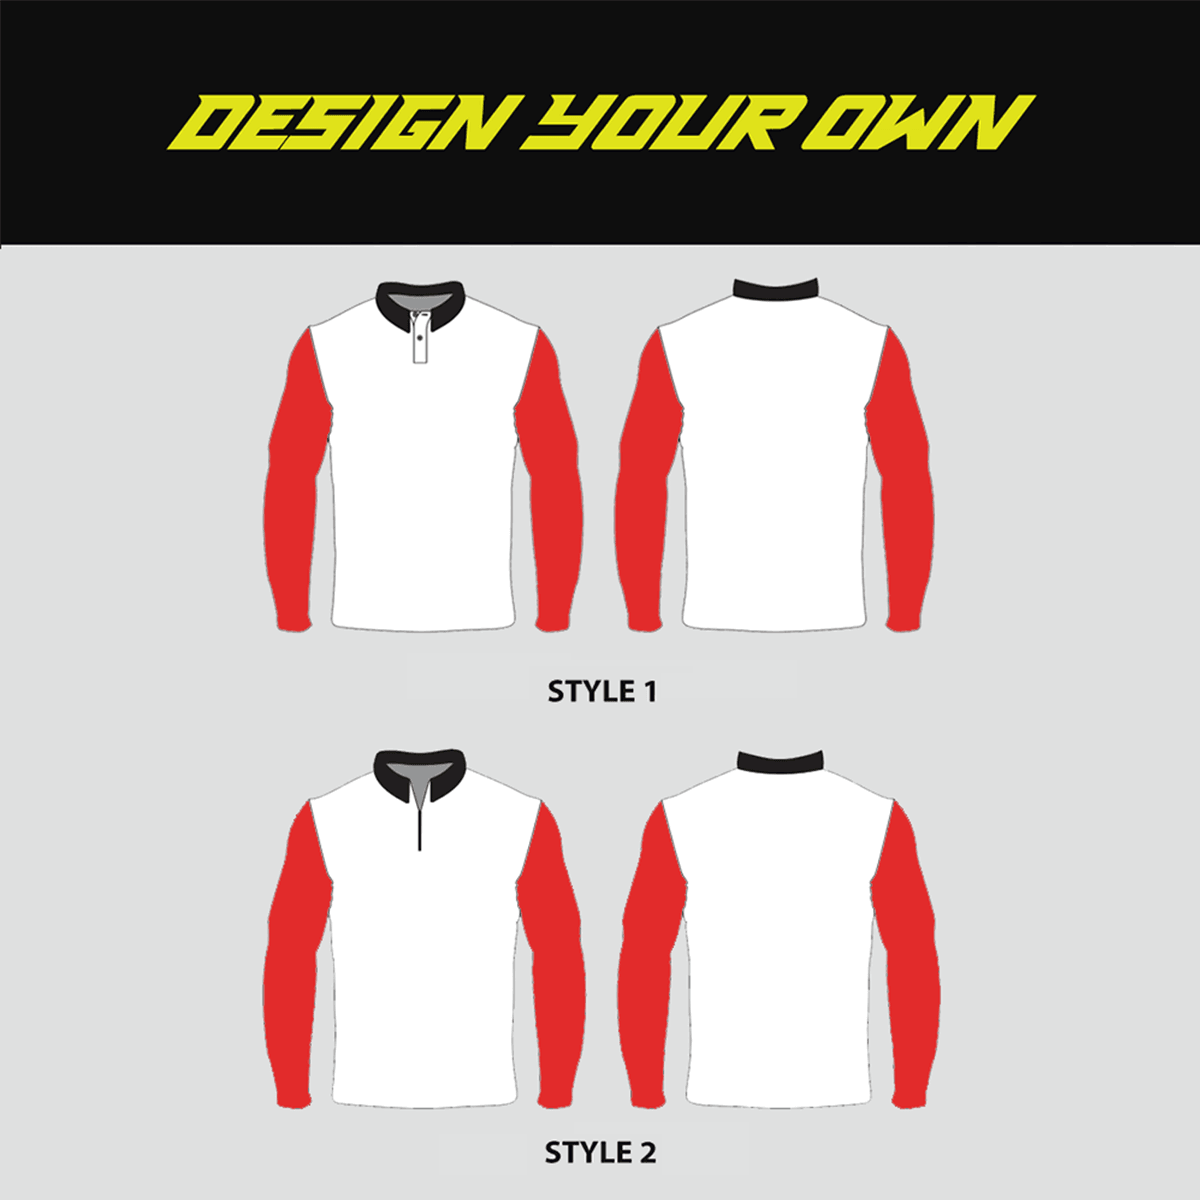 Sublimated Custom Long Sleeve Polo Shirts - DESIGN YOUR OWN - YoungSpeeds